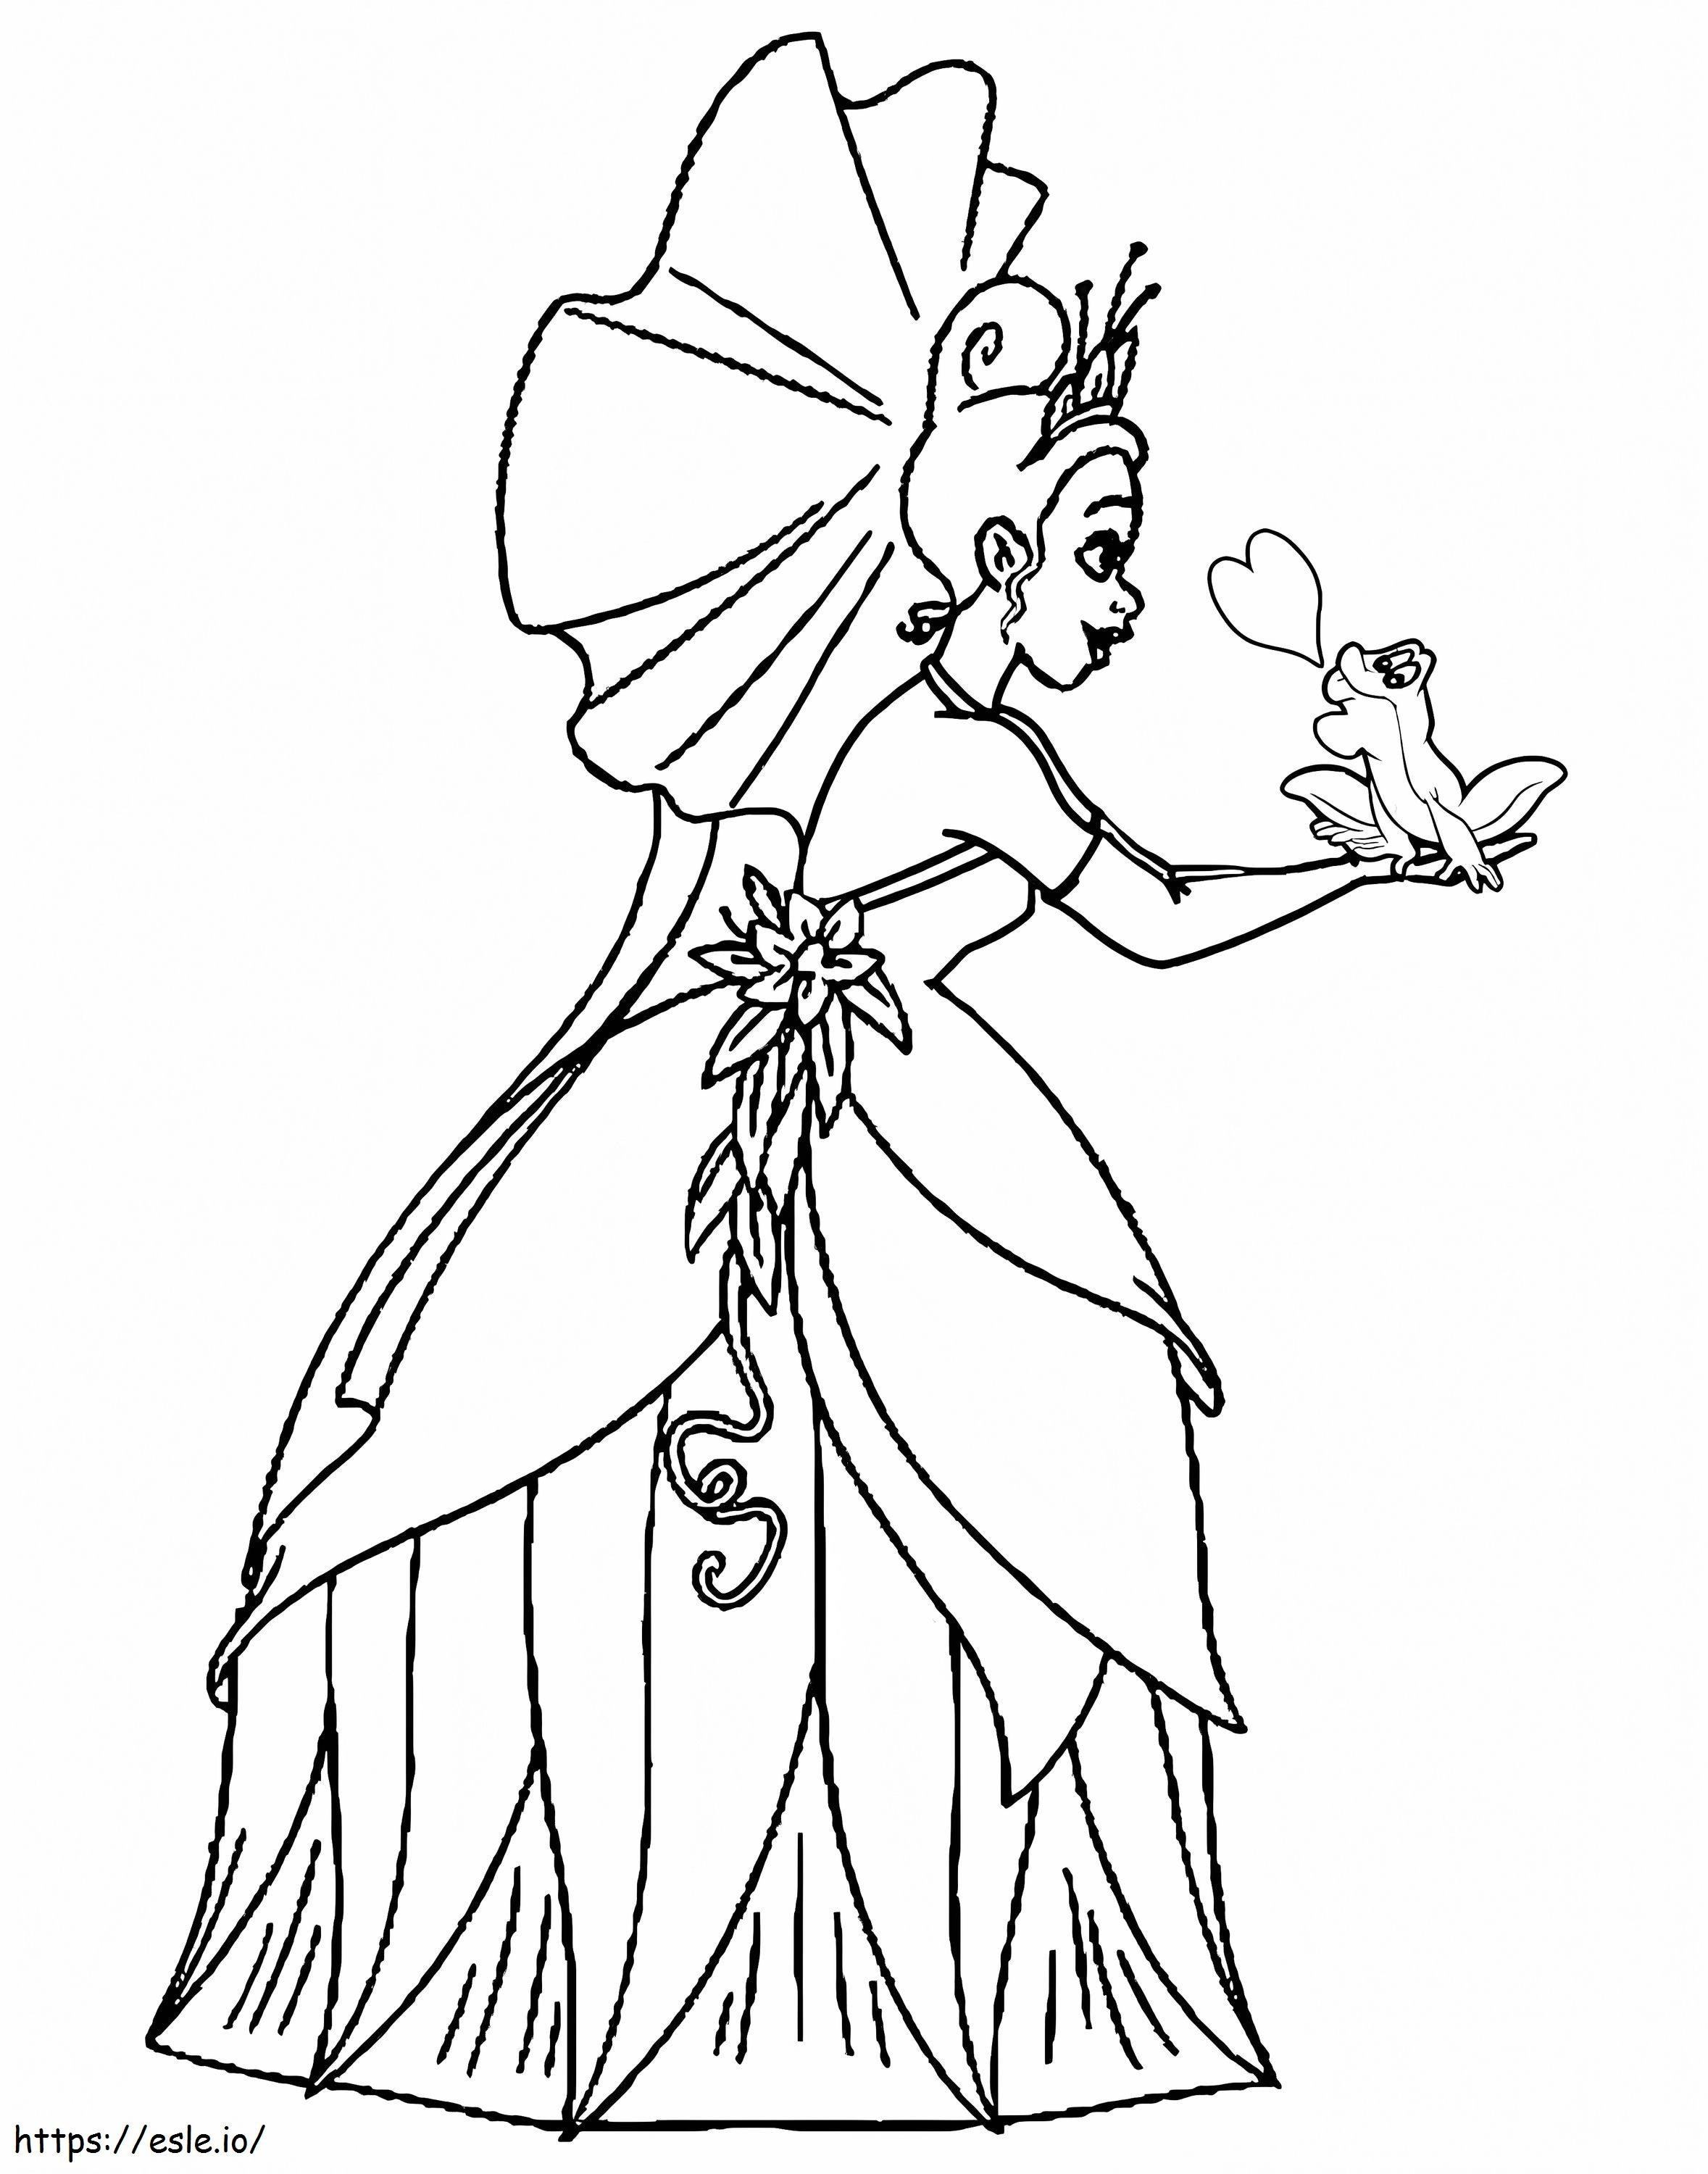 Princess And The Frog coloring page